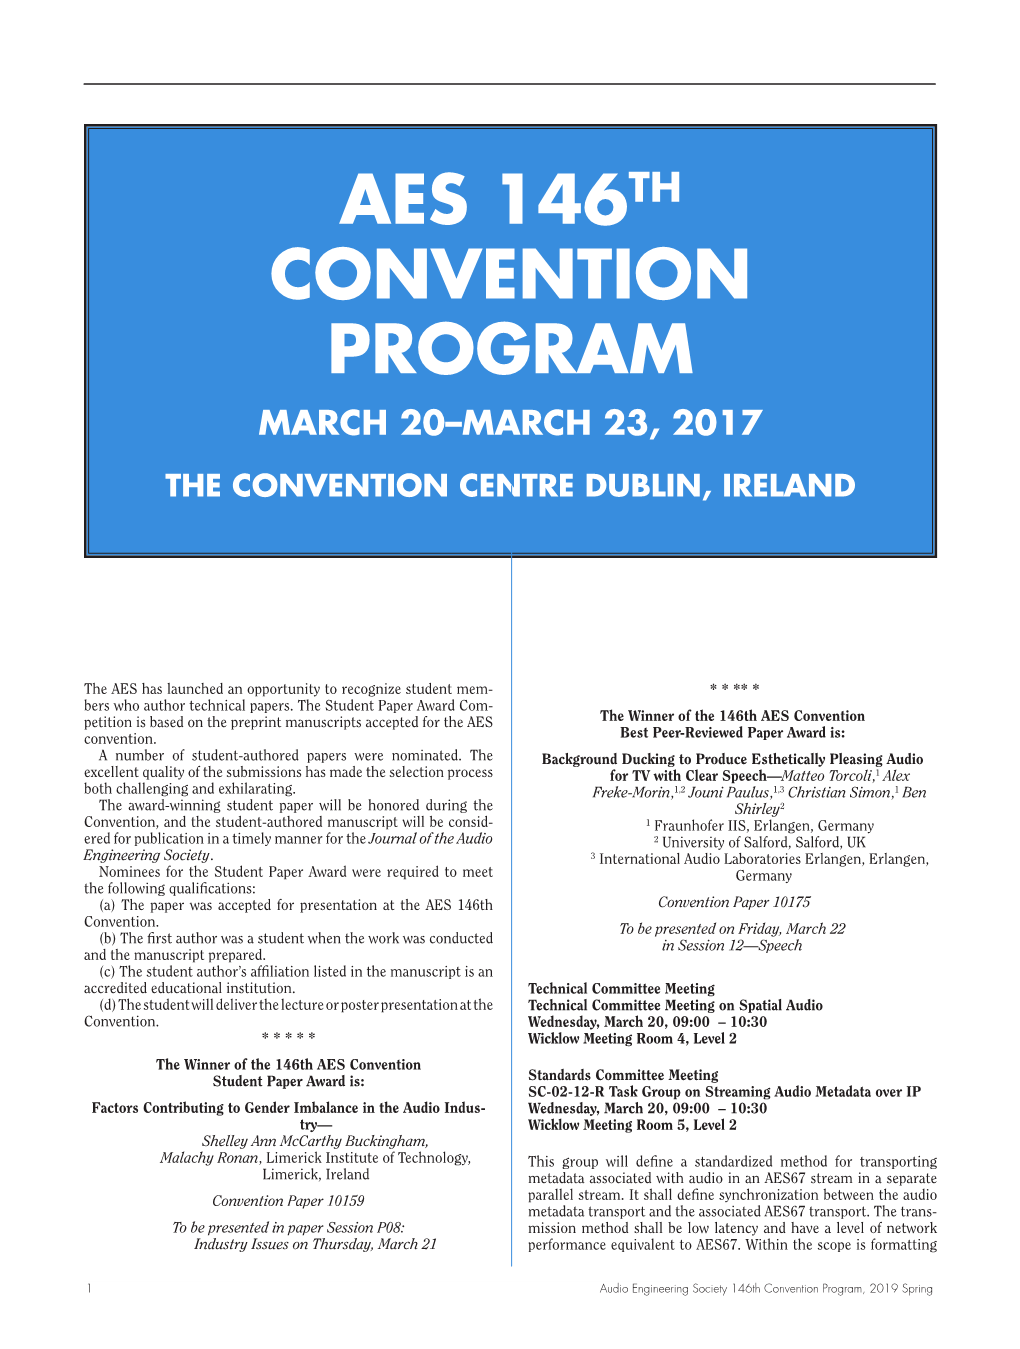 Convention Program March 20–March 23, 2017